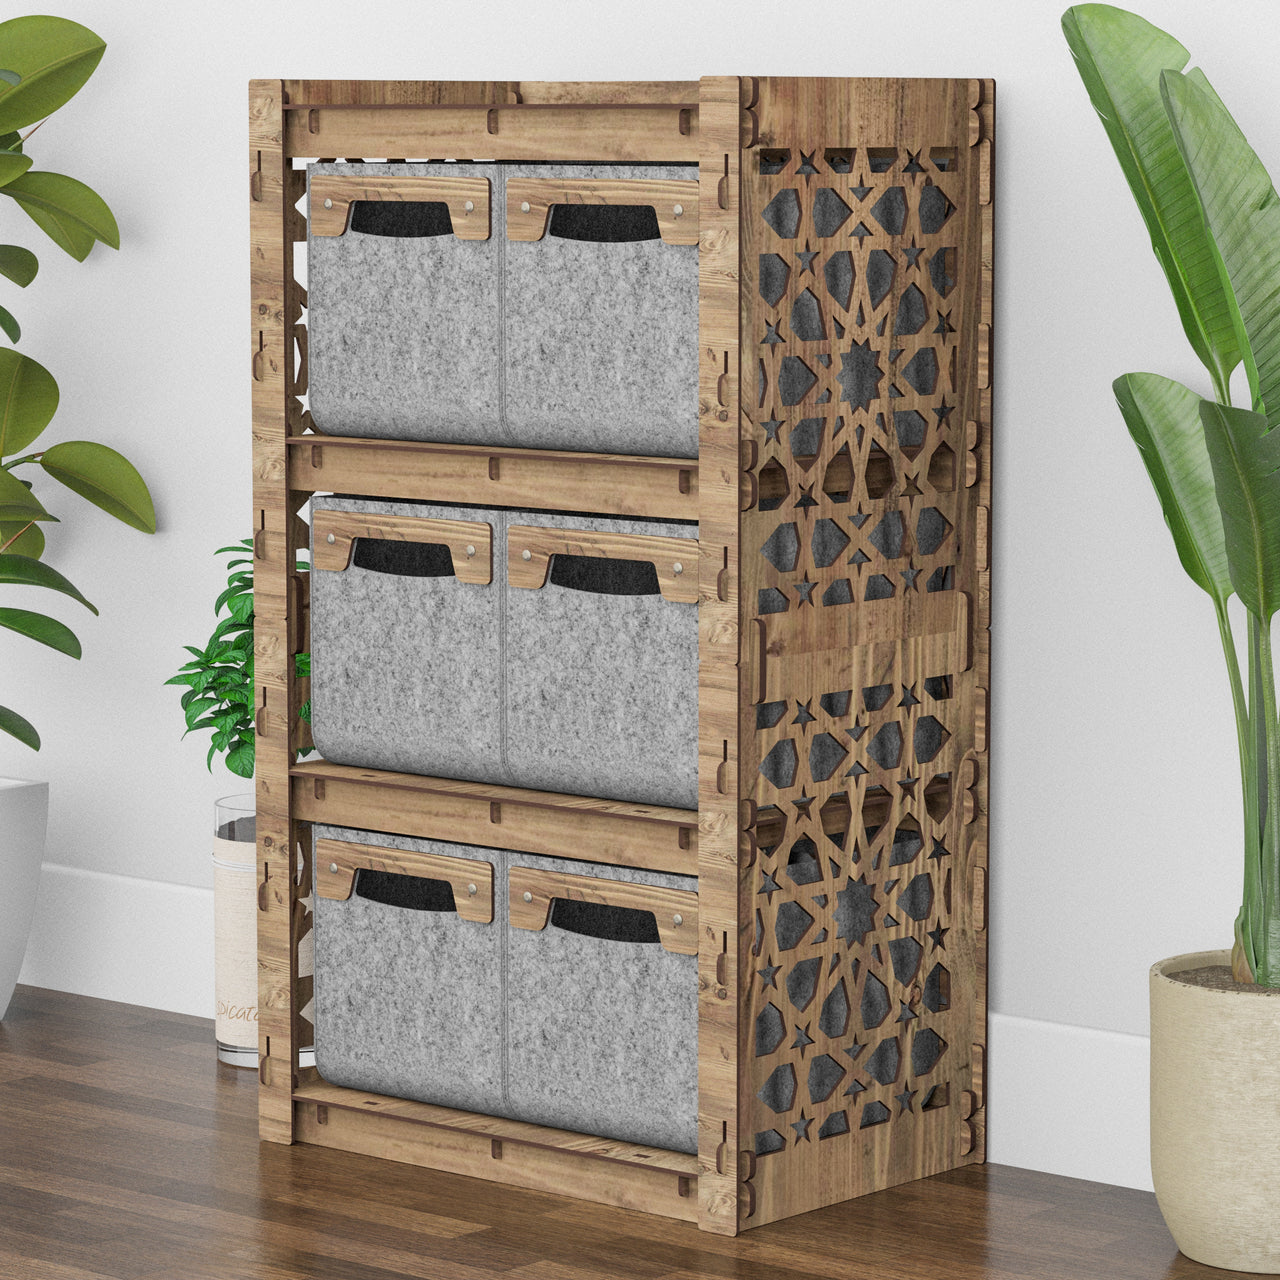 Arabic Chest Of 6 Drawers Storage Cabinet [6 SMALL GRAY BINS]